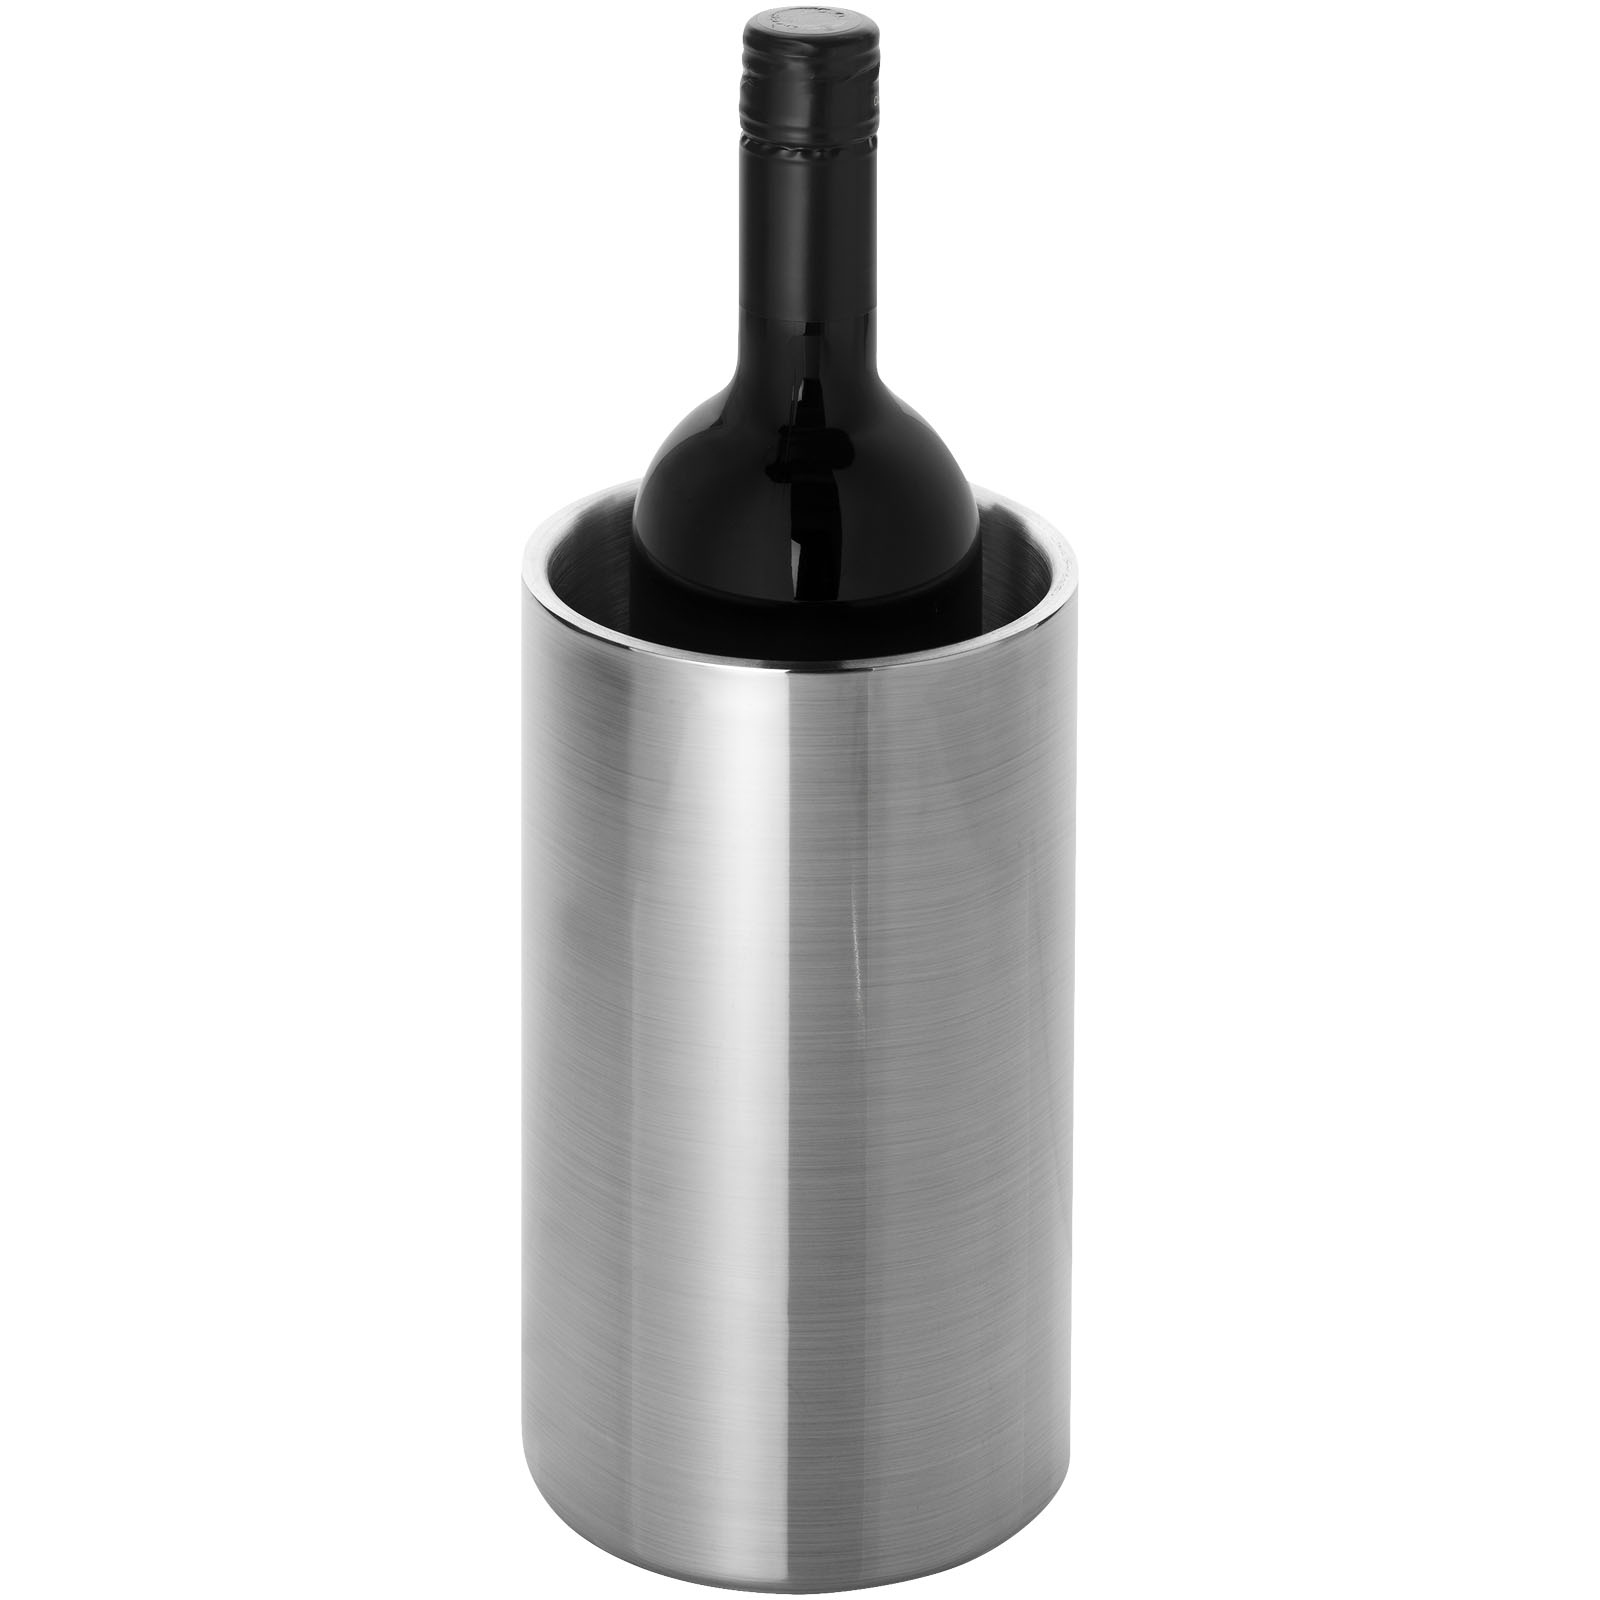 Home & Kitchen - Cielo double-walled stainless steel wine cooler